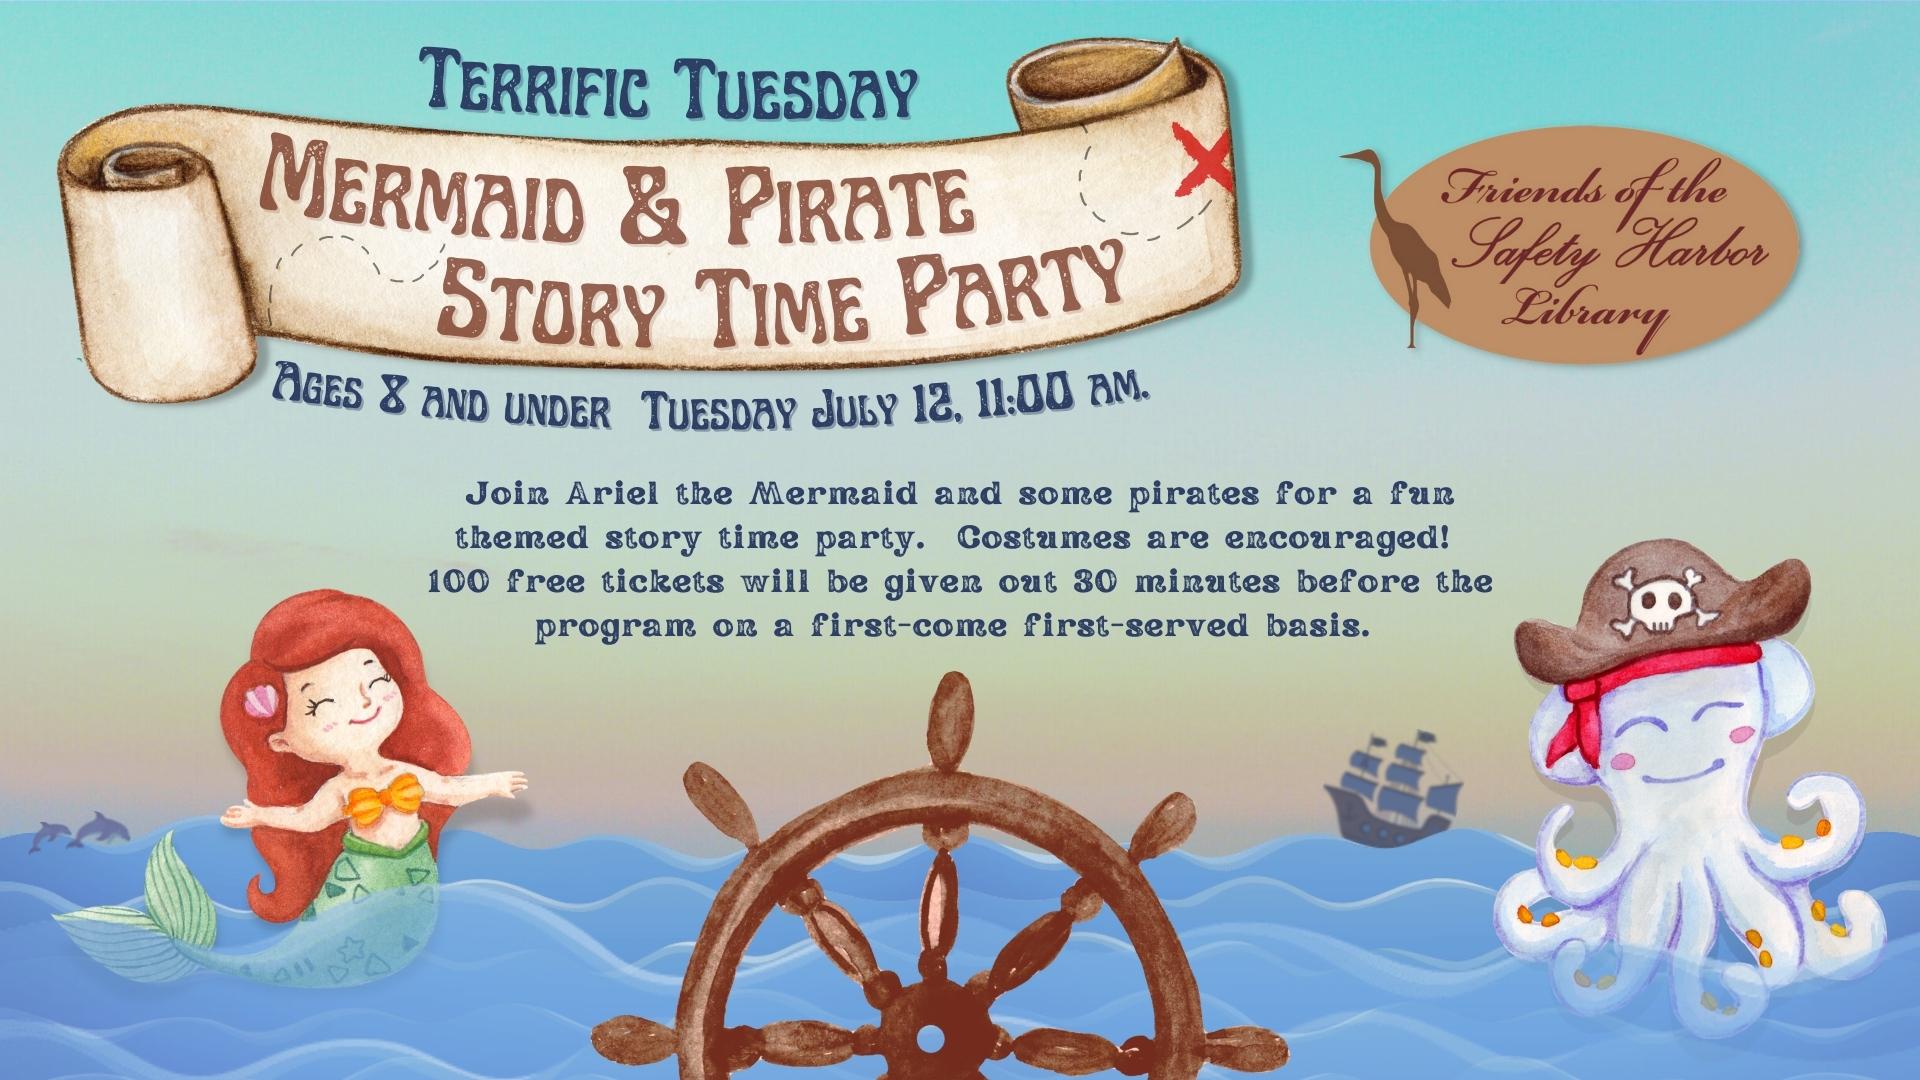 Mermaids & Pirates Story Time Party 